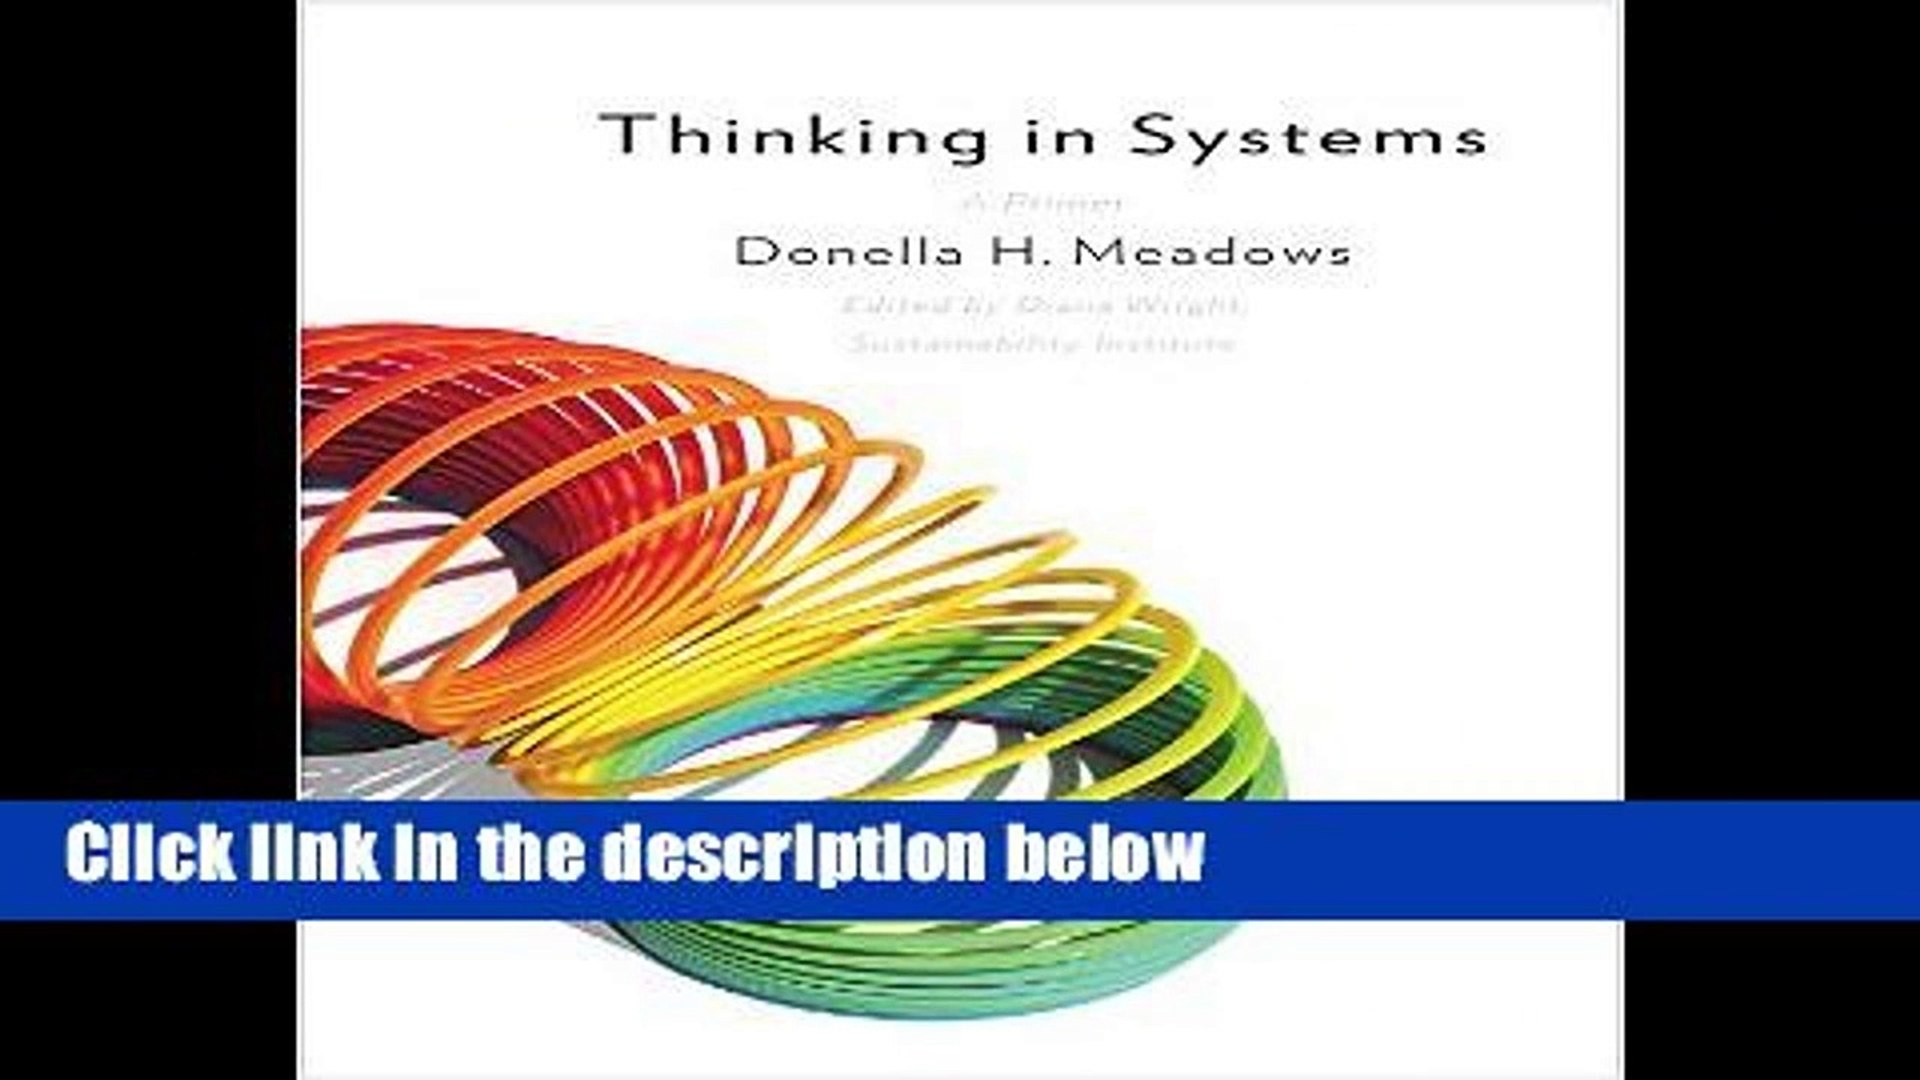 download free donella meadows thinking in systems pdf free